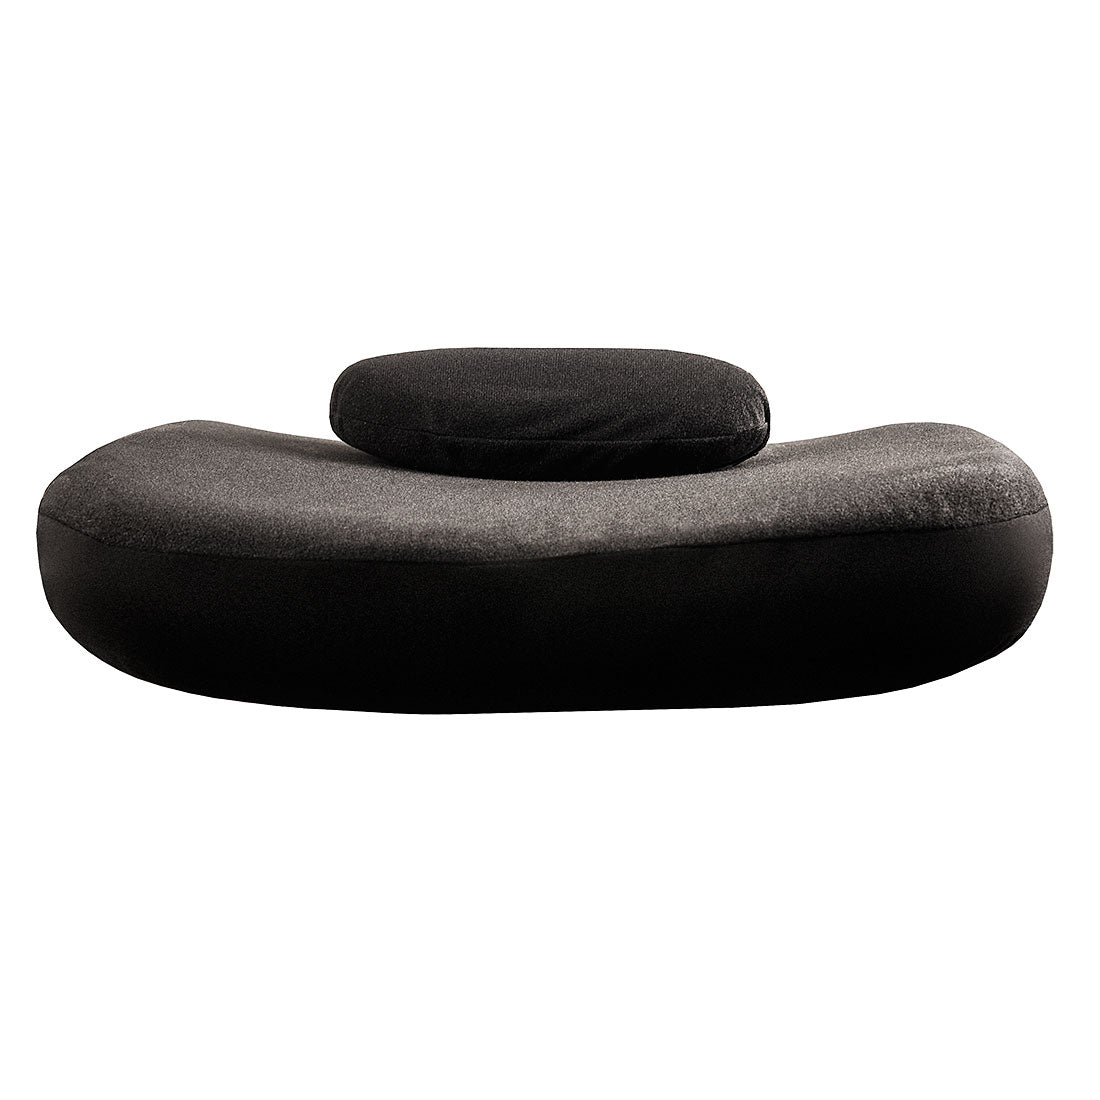 Backrest Cushion with Lumbar Support